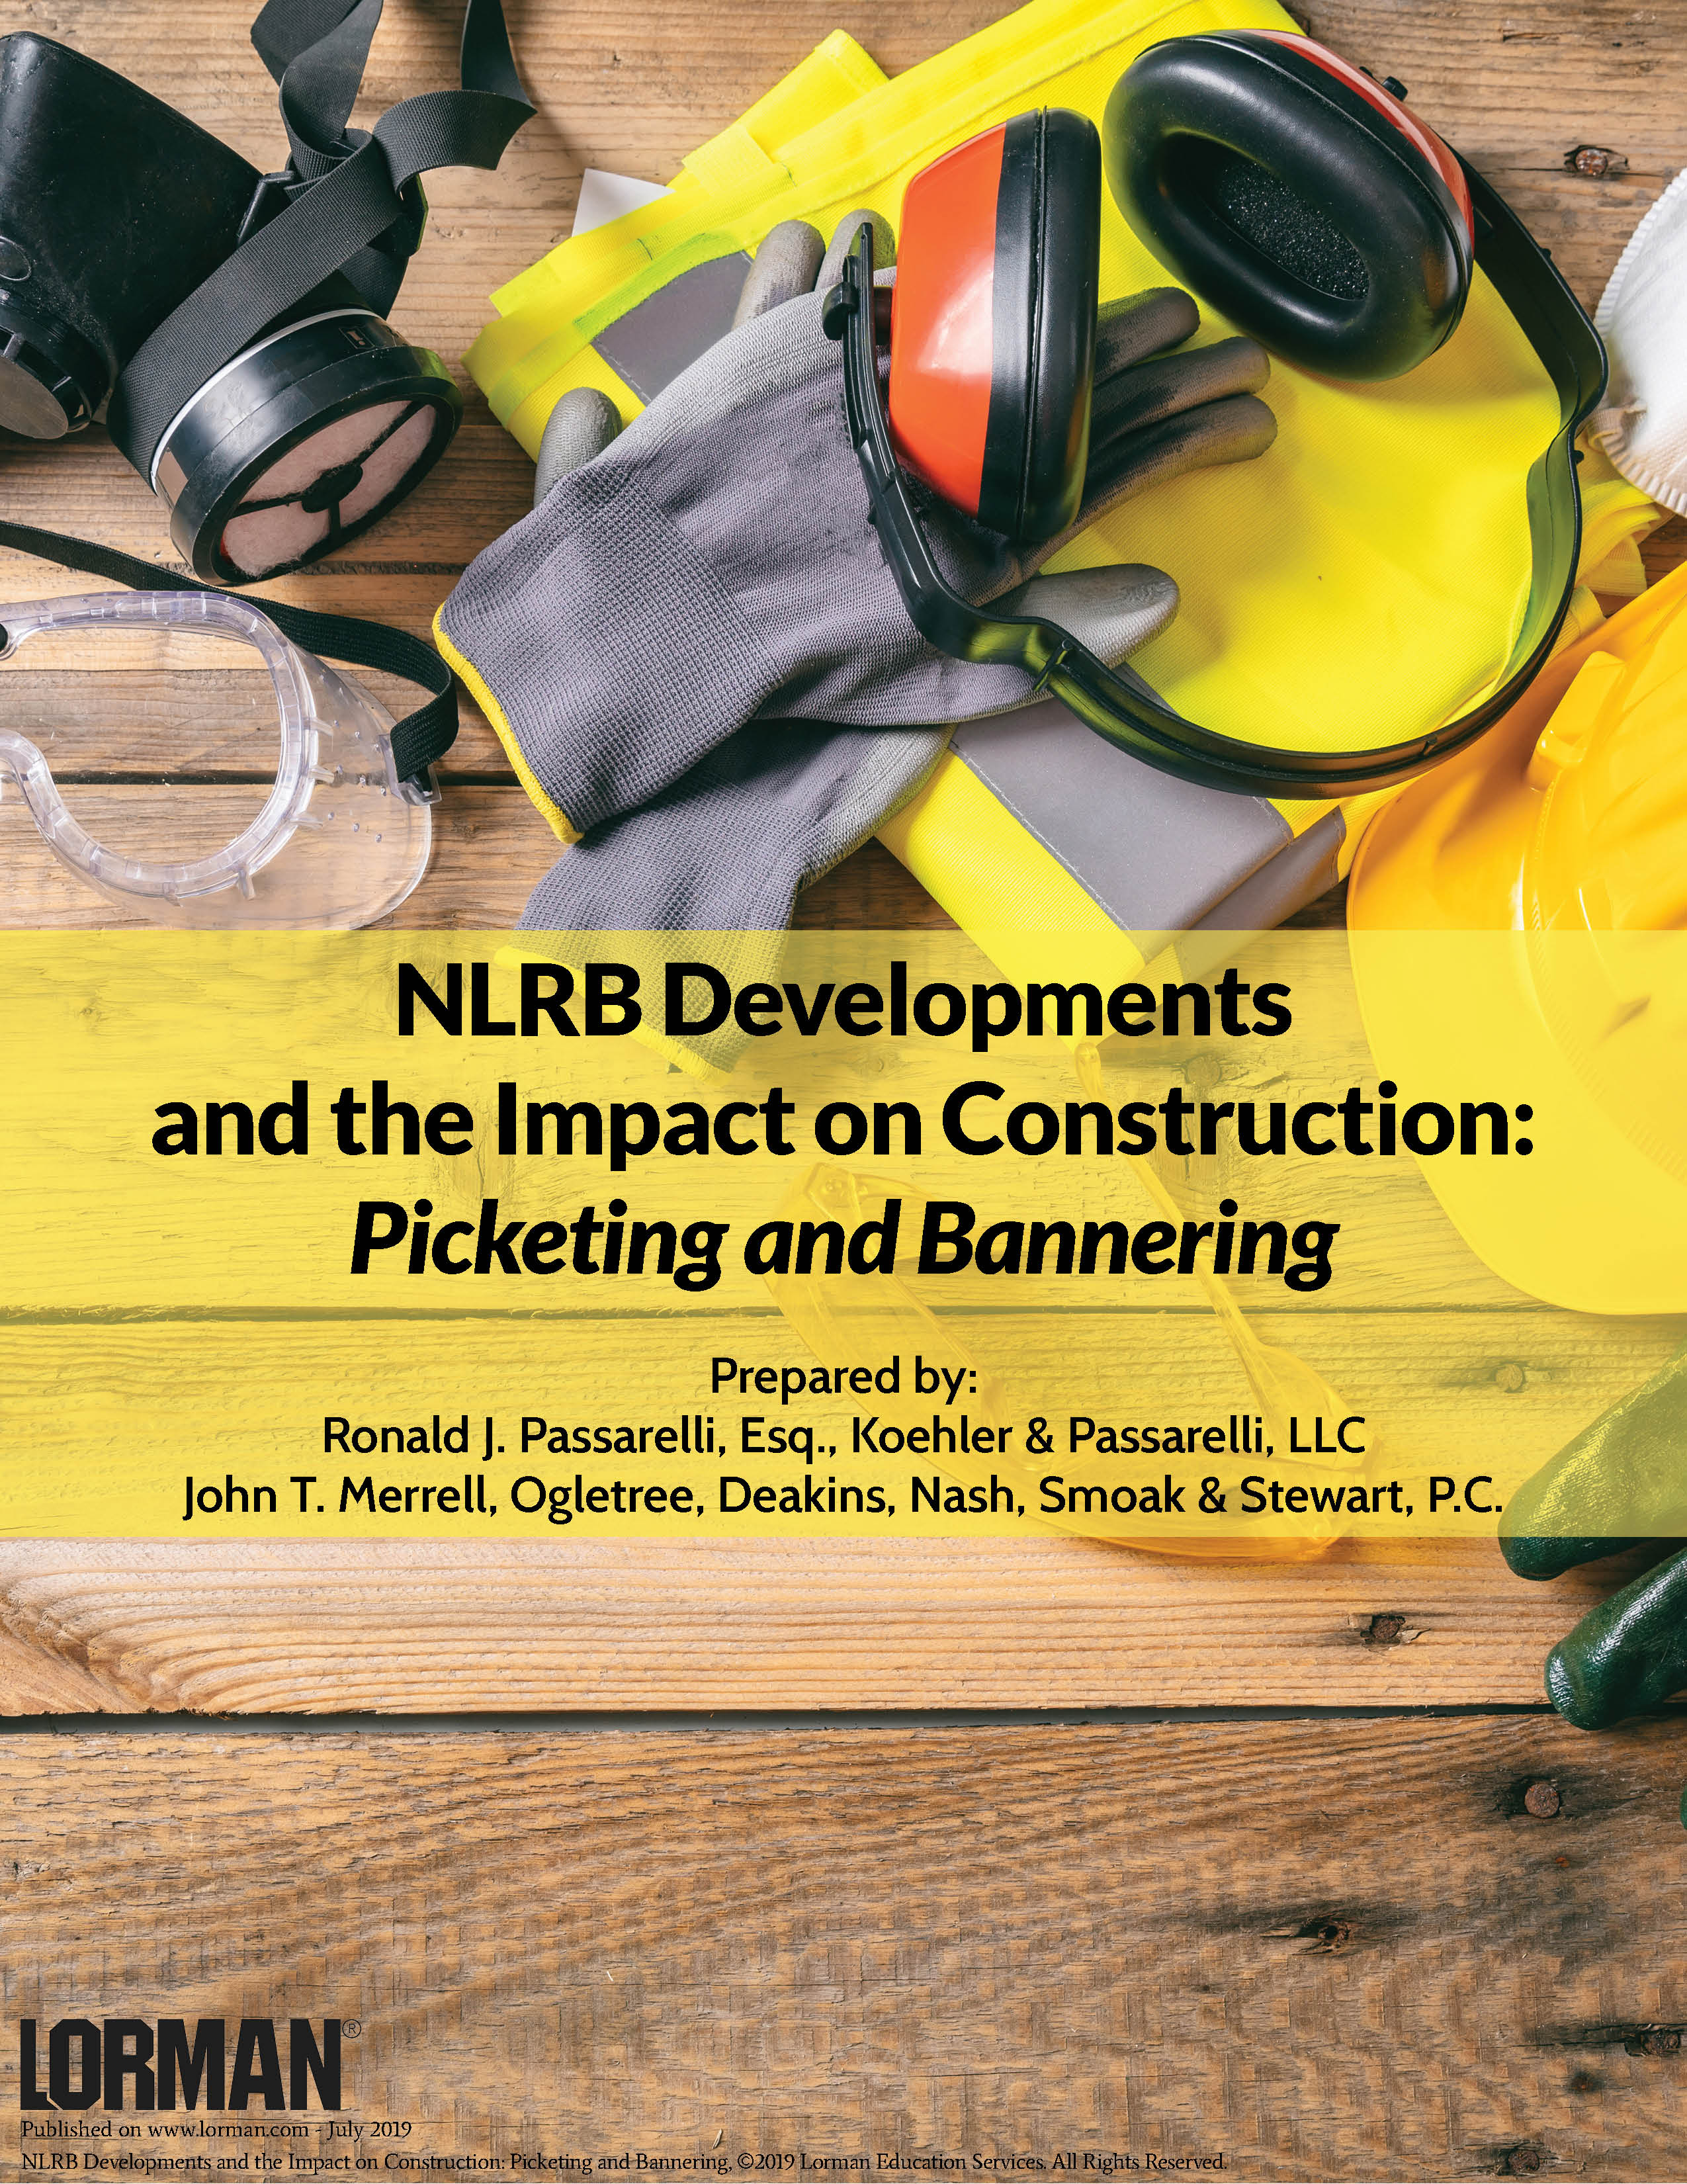 NLRB Developments and the Impact on Construction: Picketing and Bannering